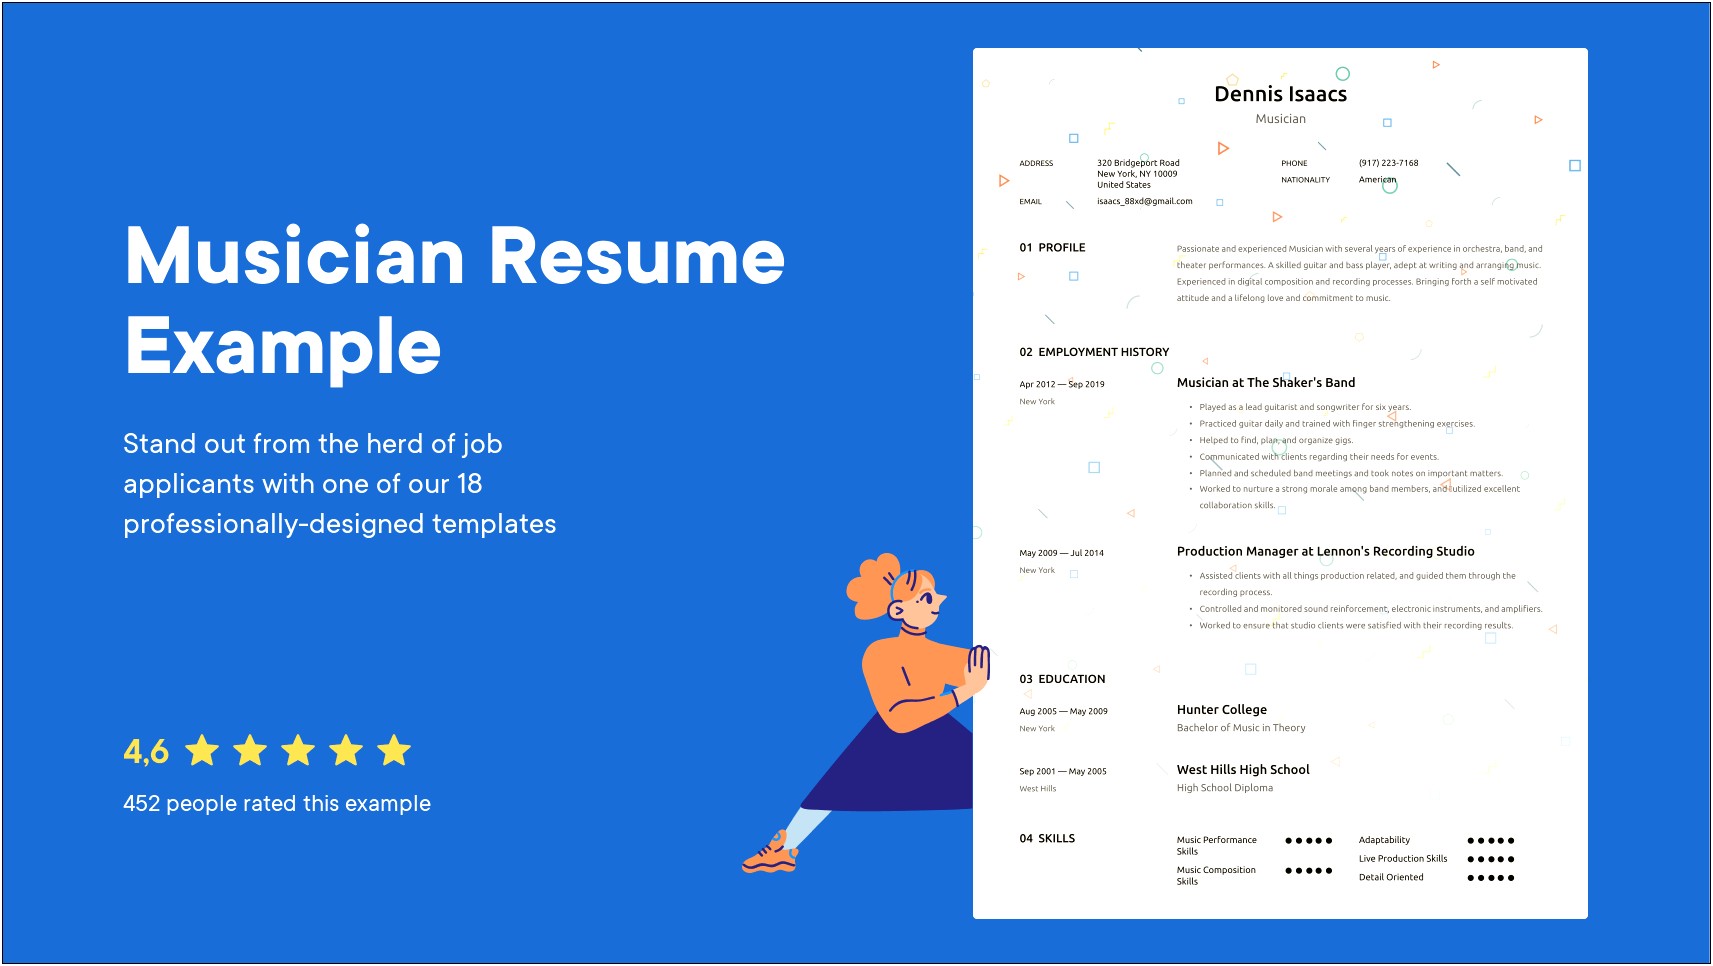 Resume Fill In Template For Musicians